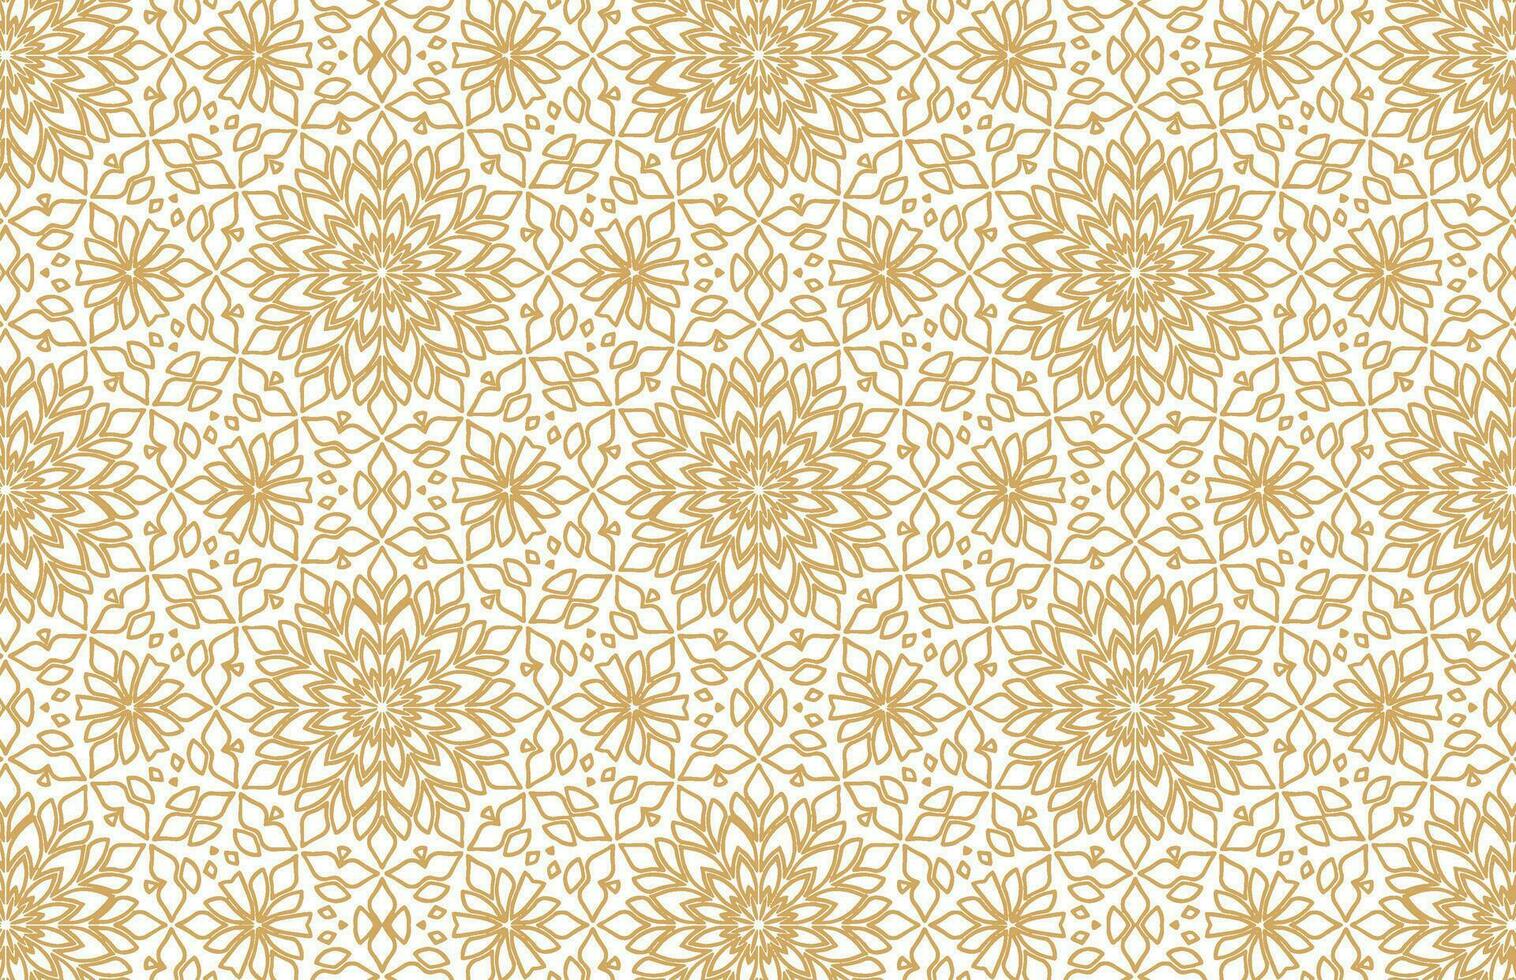 Ethnic floral seamless grunge pattern vector